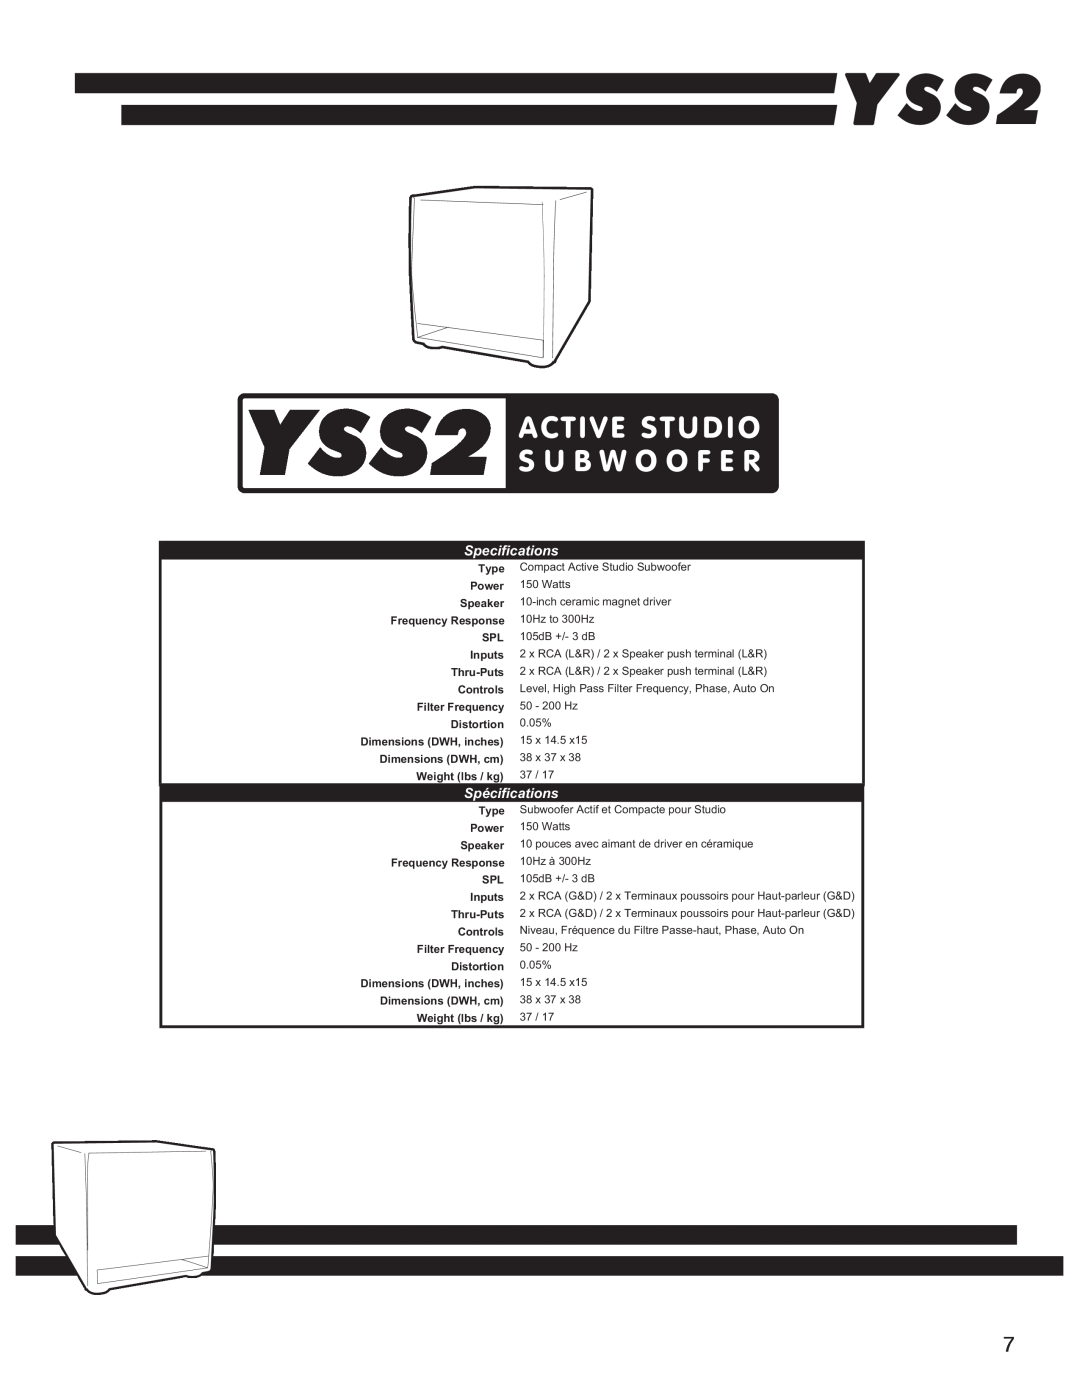 RCA YS1052 owner manual YSS2, Active Studio, S U B W O O F E R, Specifications, Spécifications 